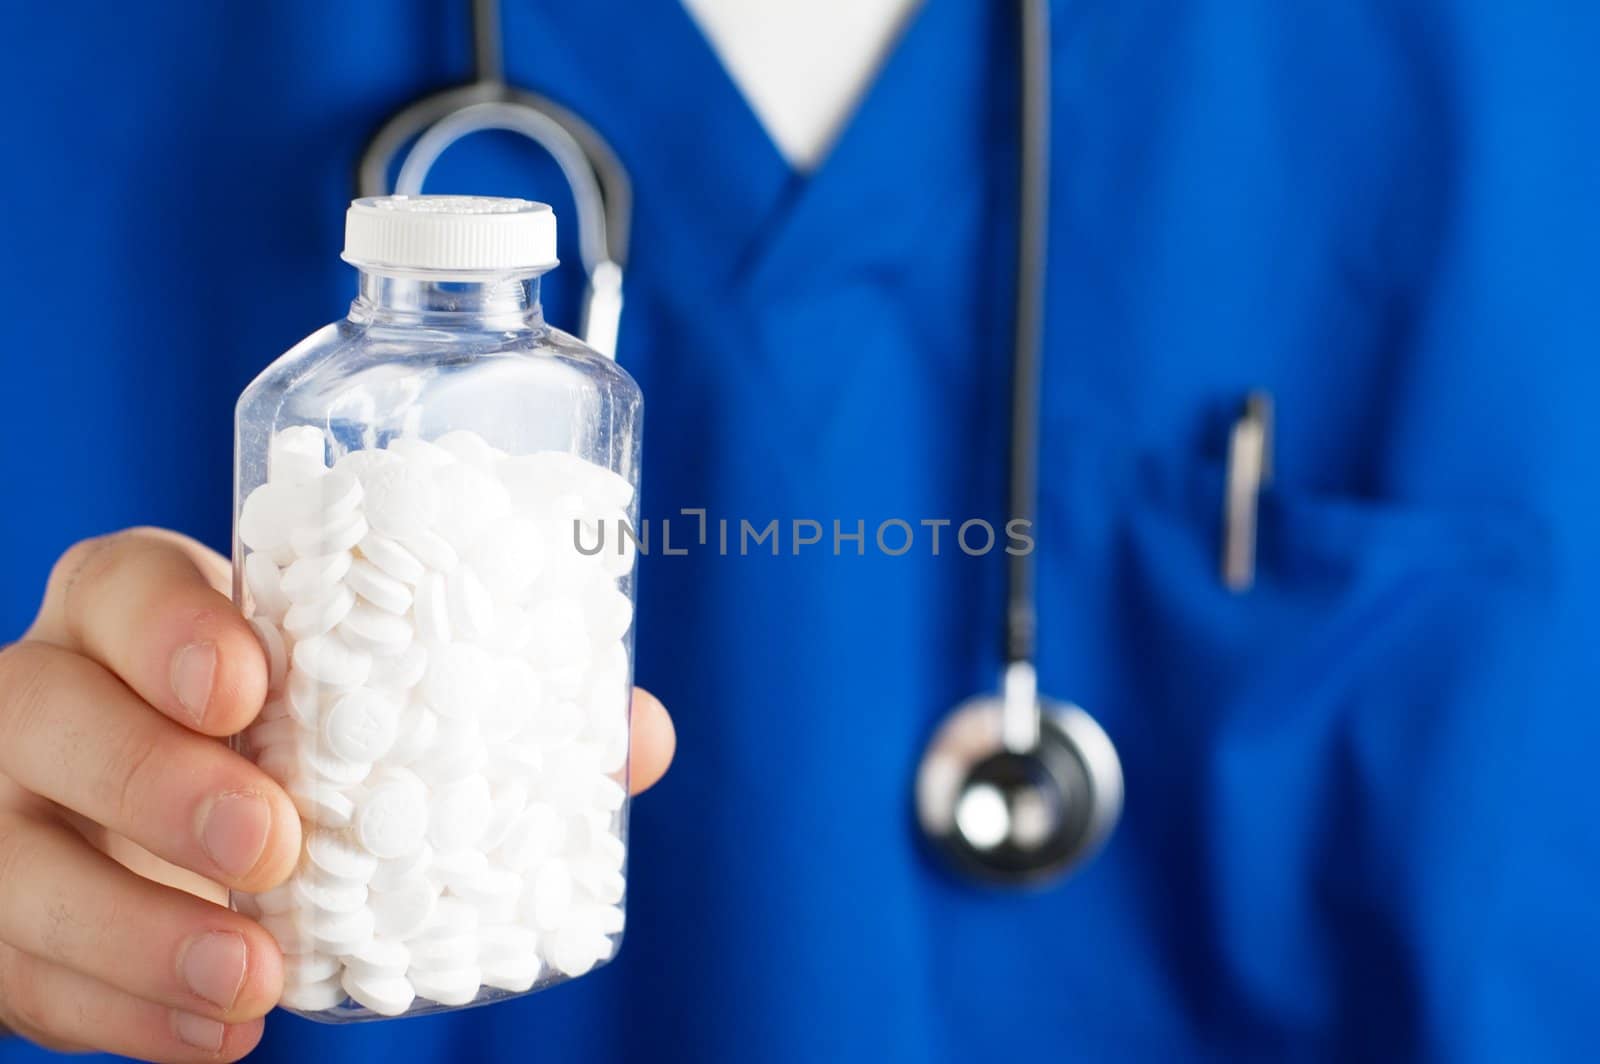 Pills being displayed in front of blue scrubs.